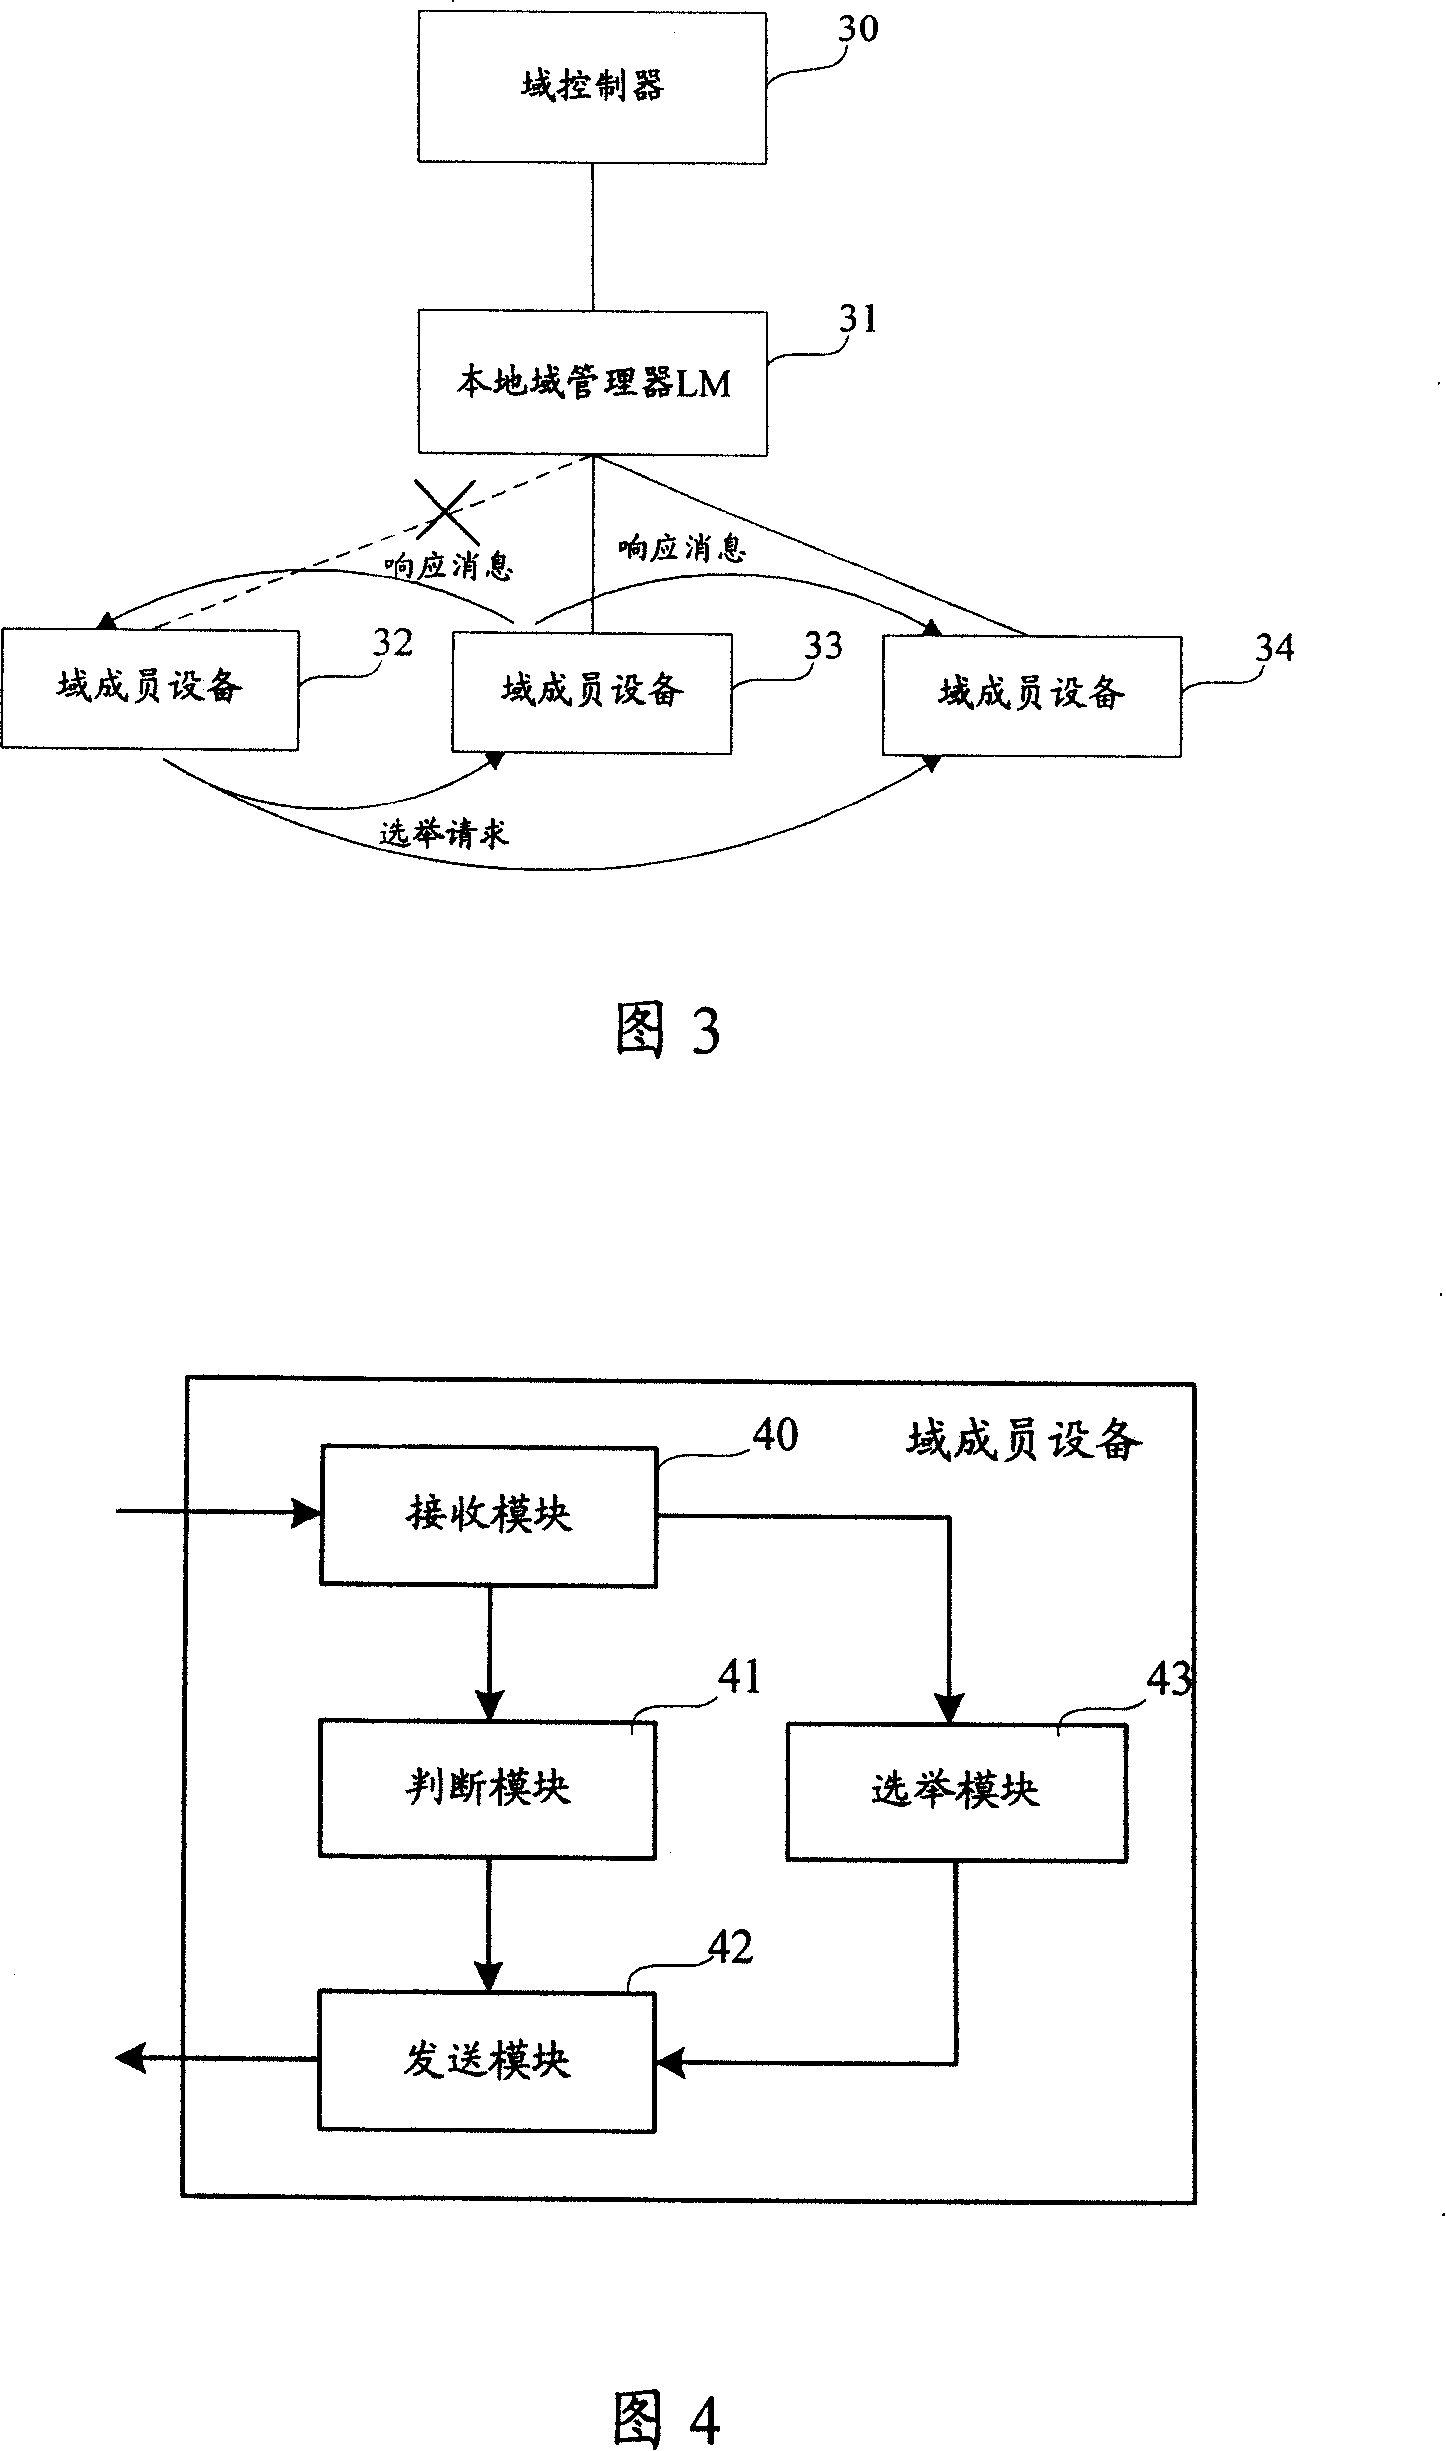 Method, device and communication system for selecting local domain supervisor